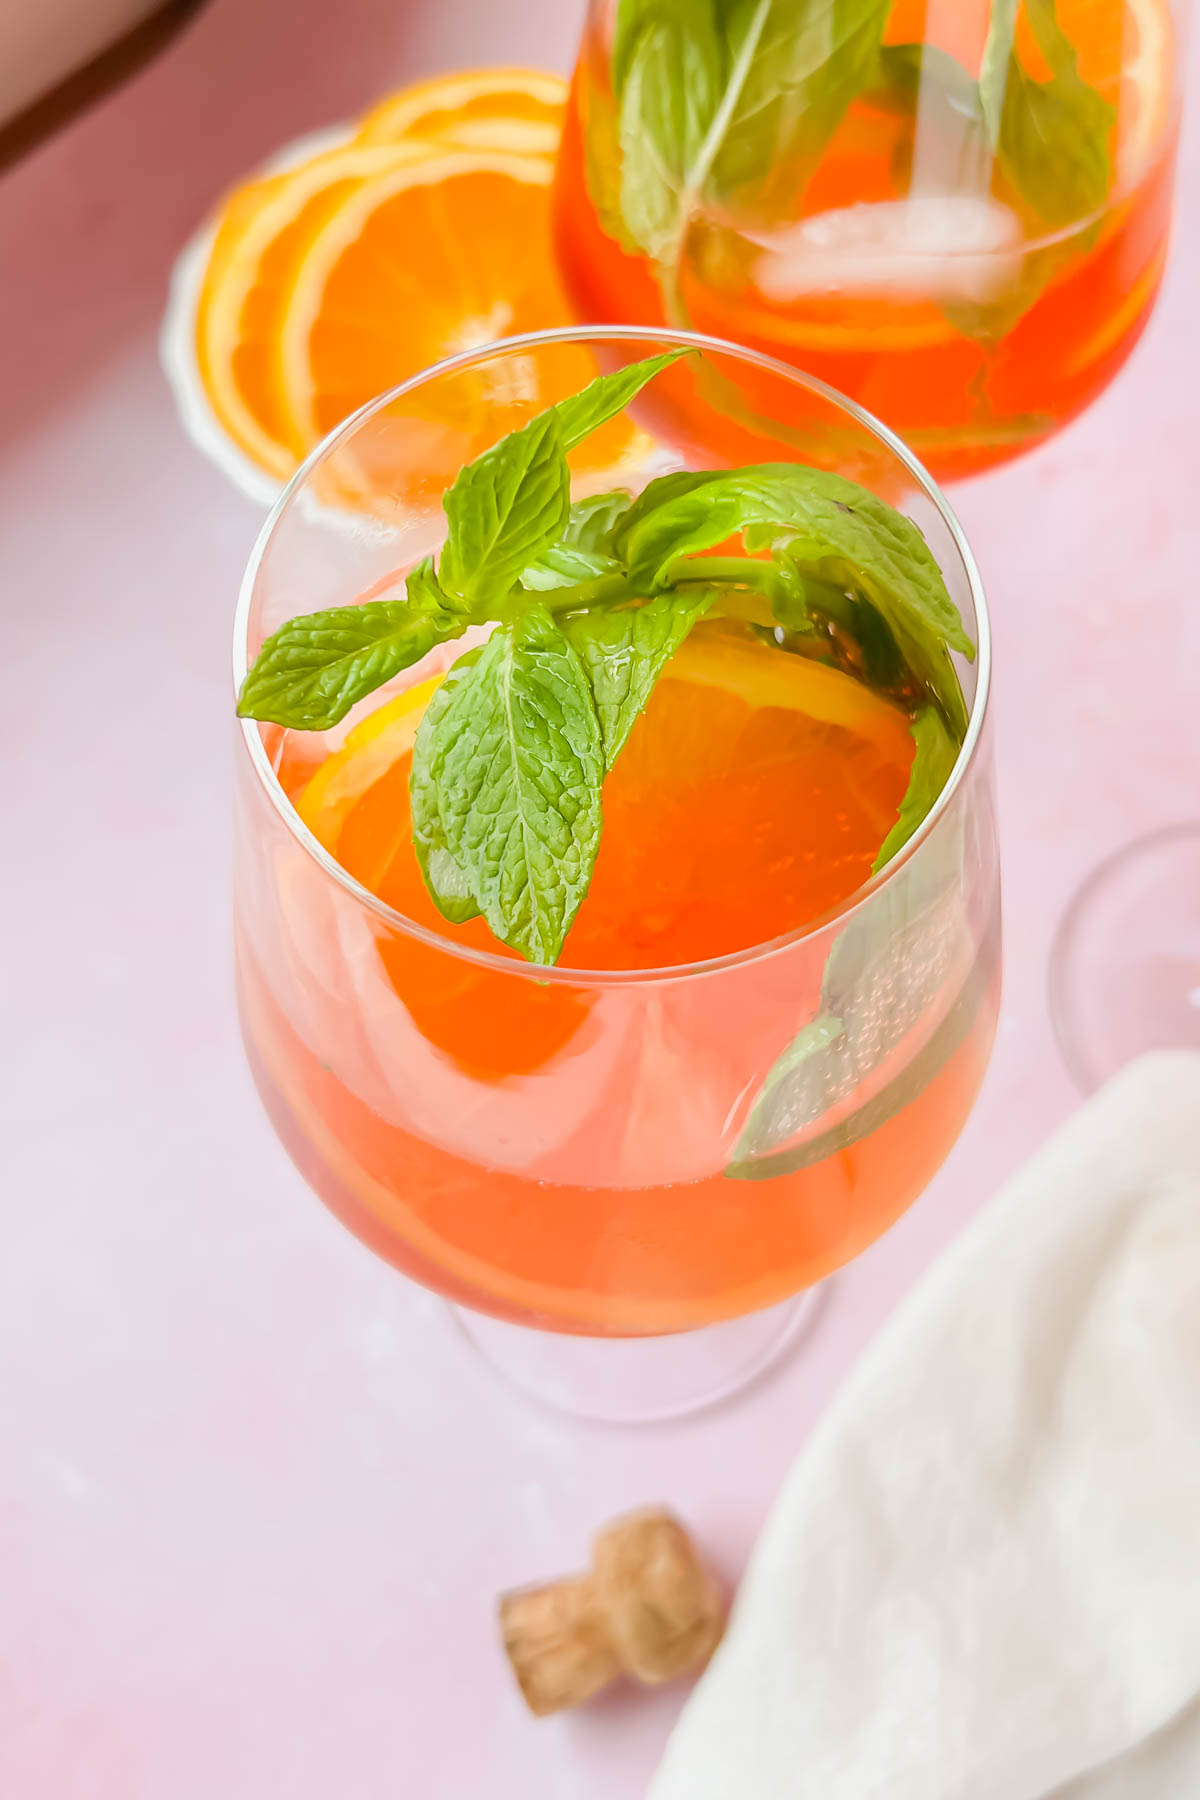 rosé aperol spritz in wine glass garnished with orange slices and mint leaves.